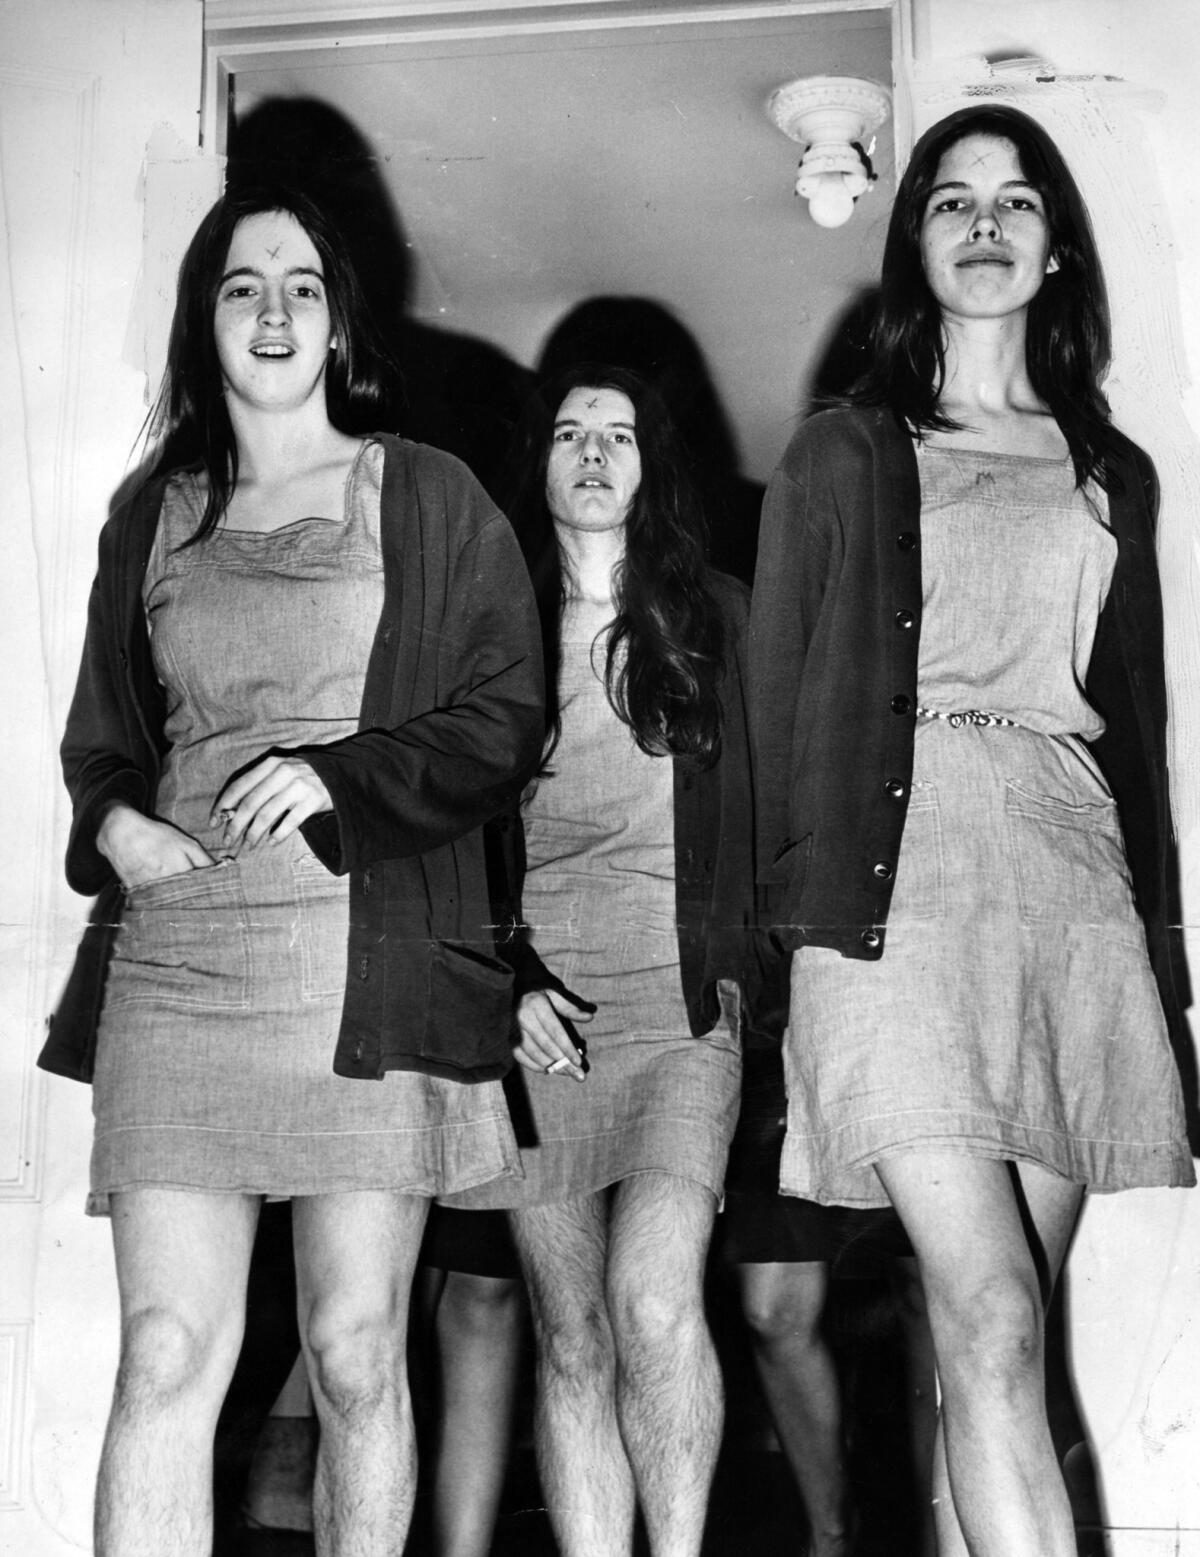 From left, Manson followers Susan Atkins, Patricia Krenwinkel and Leslie Van Houten walk into a morning court session in 1970. When Manson carved an "X" into his forehead during the trial, his "family" members followed suit. ( Los Angeles Times)